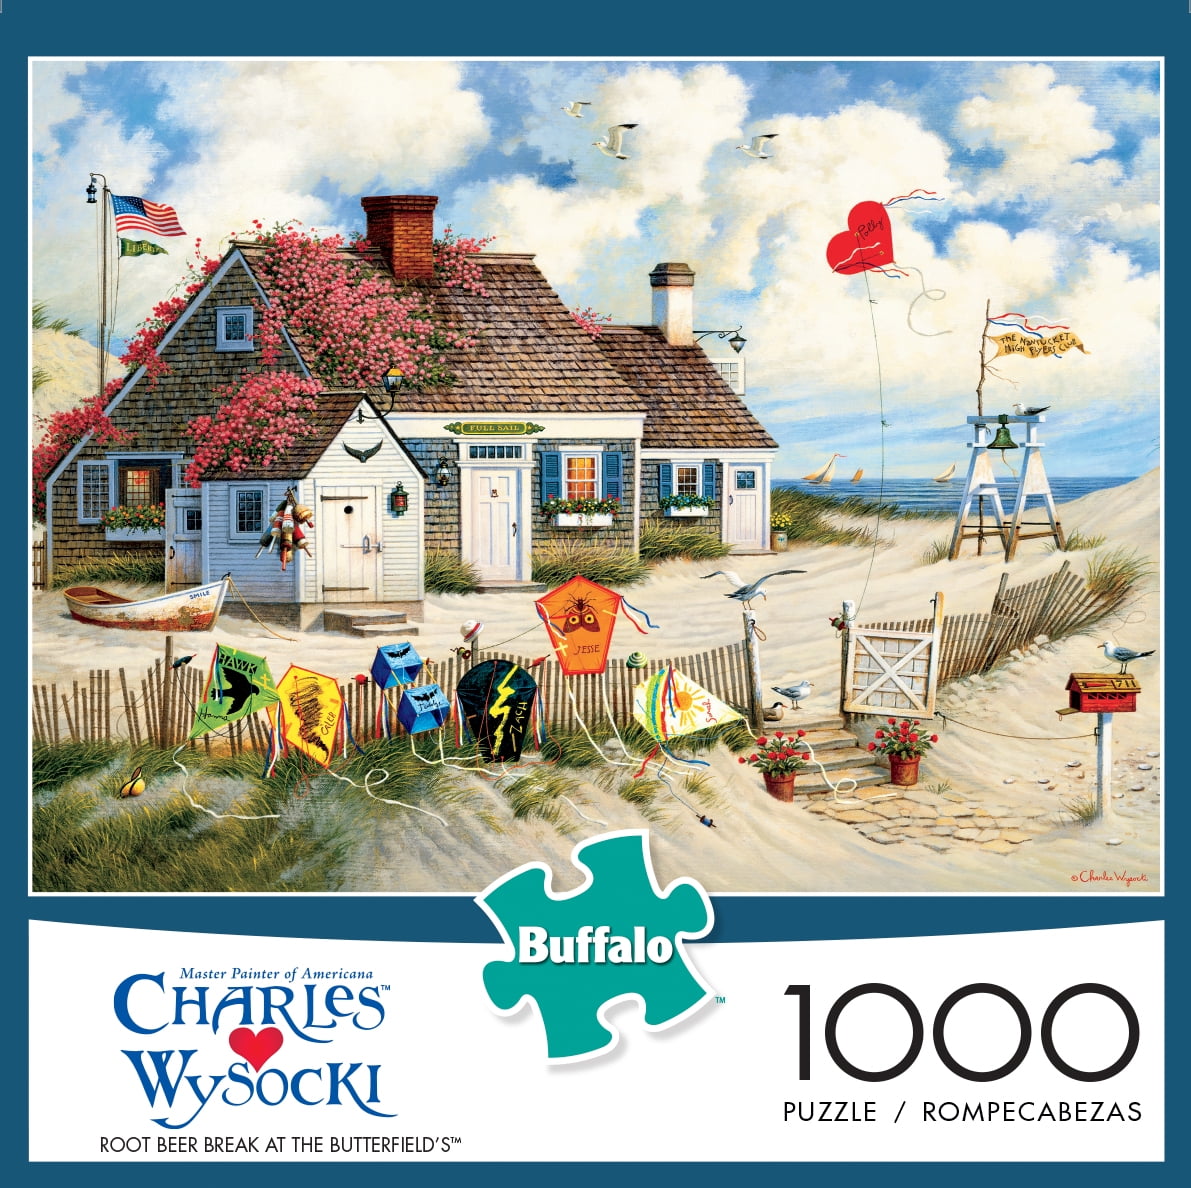 Buffalo Games-Charles Wysocki-Root Beer Break at The Butterfields-1000 Piece Jigsaw Puzzle 